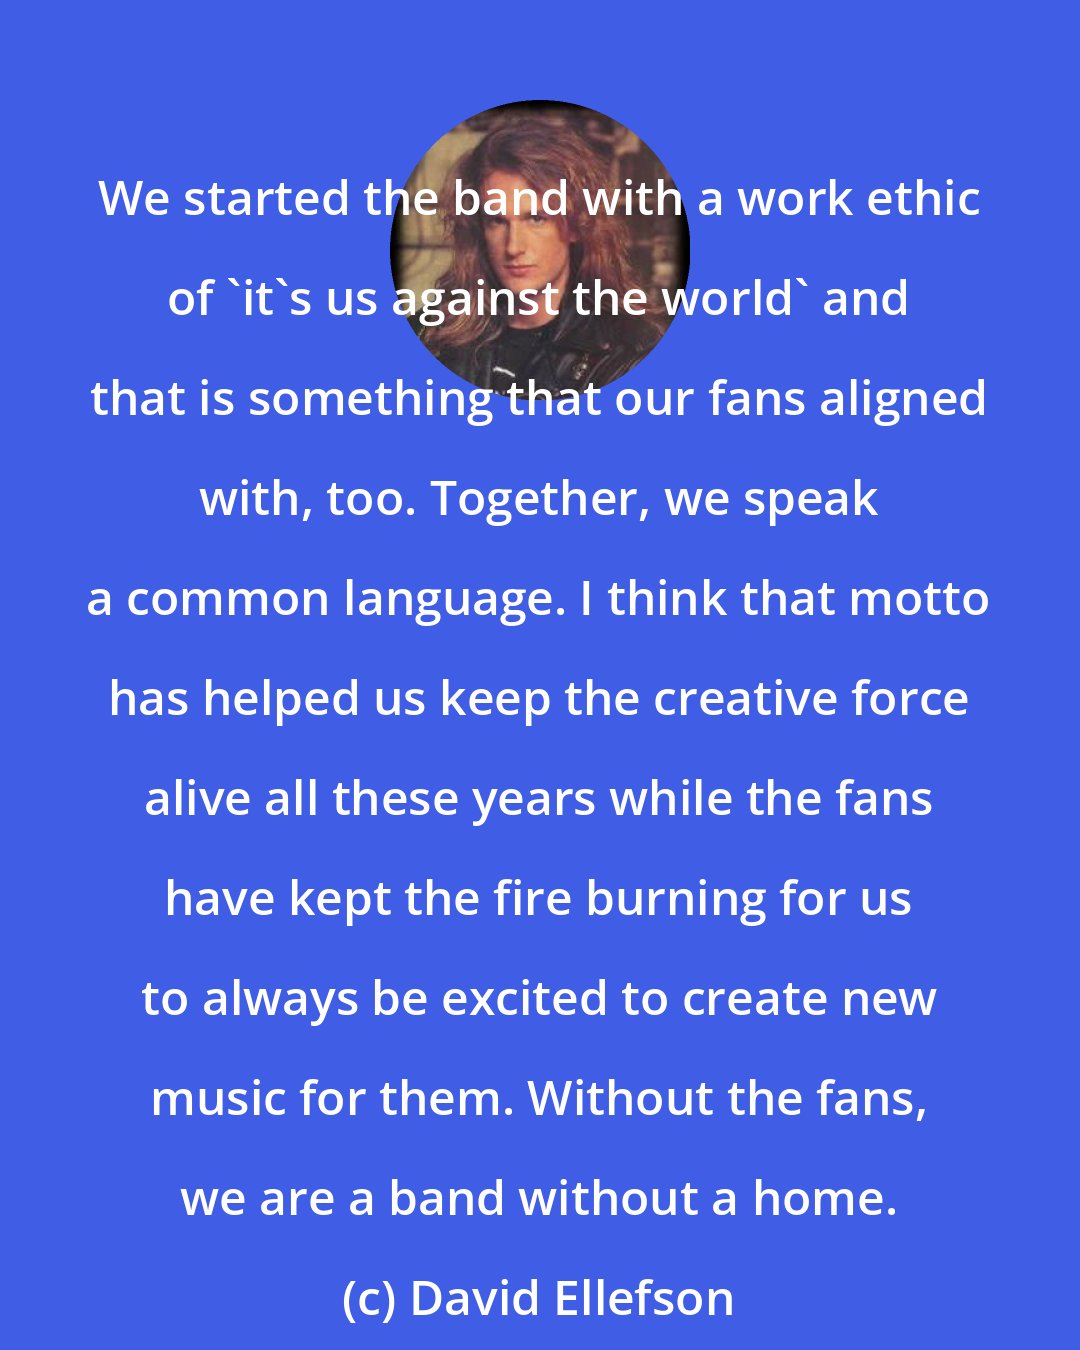 David Ellefson: We started the band with a work ethic of 'it's us against the world' and that is something that our fans aligned with, too. Together, we speak a common language. I think that motto has helped us keep the creative force alive all these years while the fans have kept the fire burning for us to always be excited to create new music for them. Without the fans, we are a band without a home.